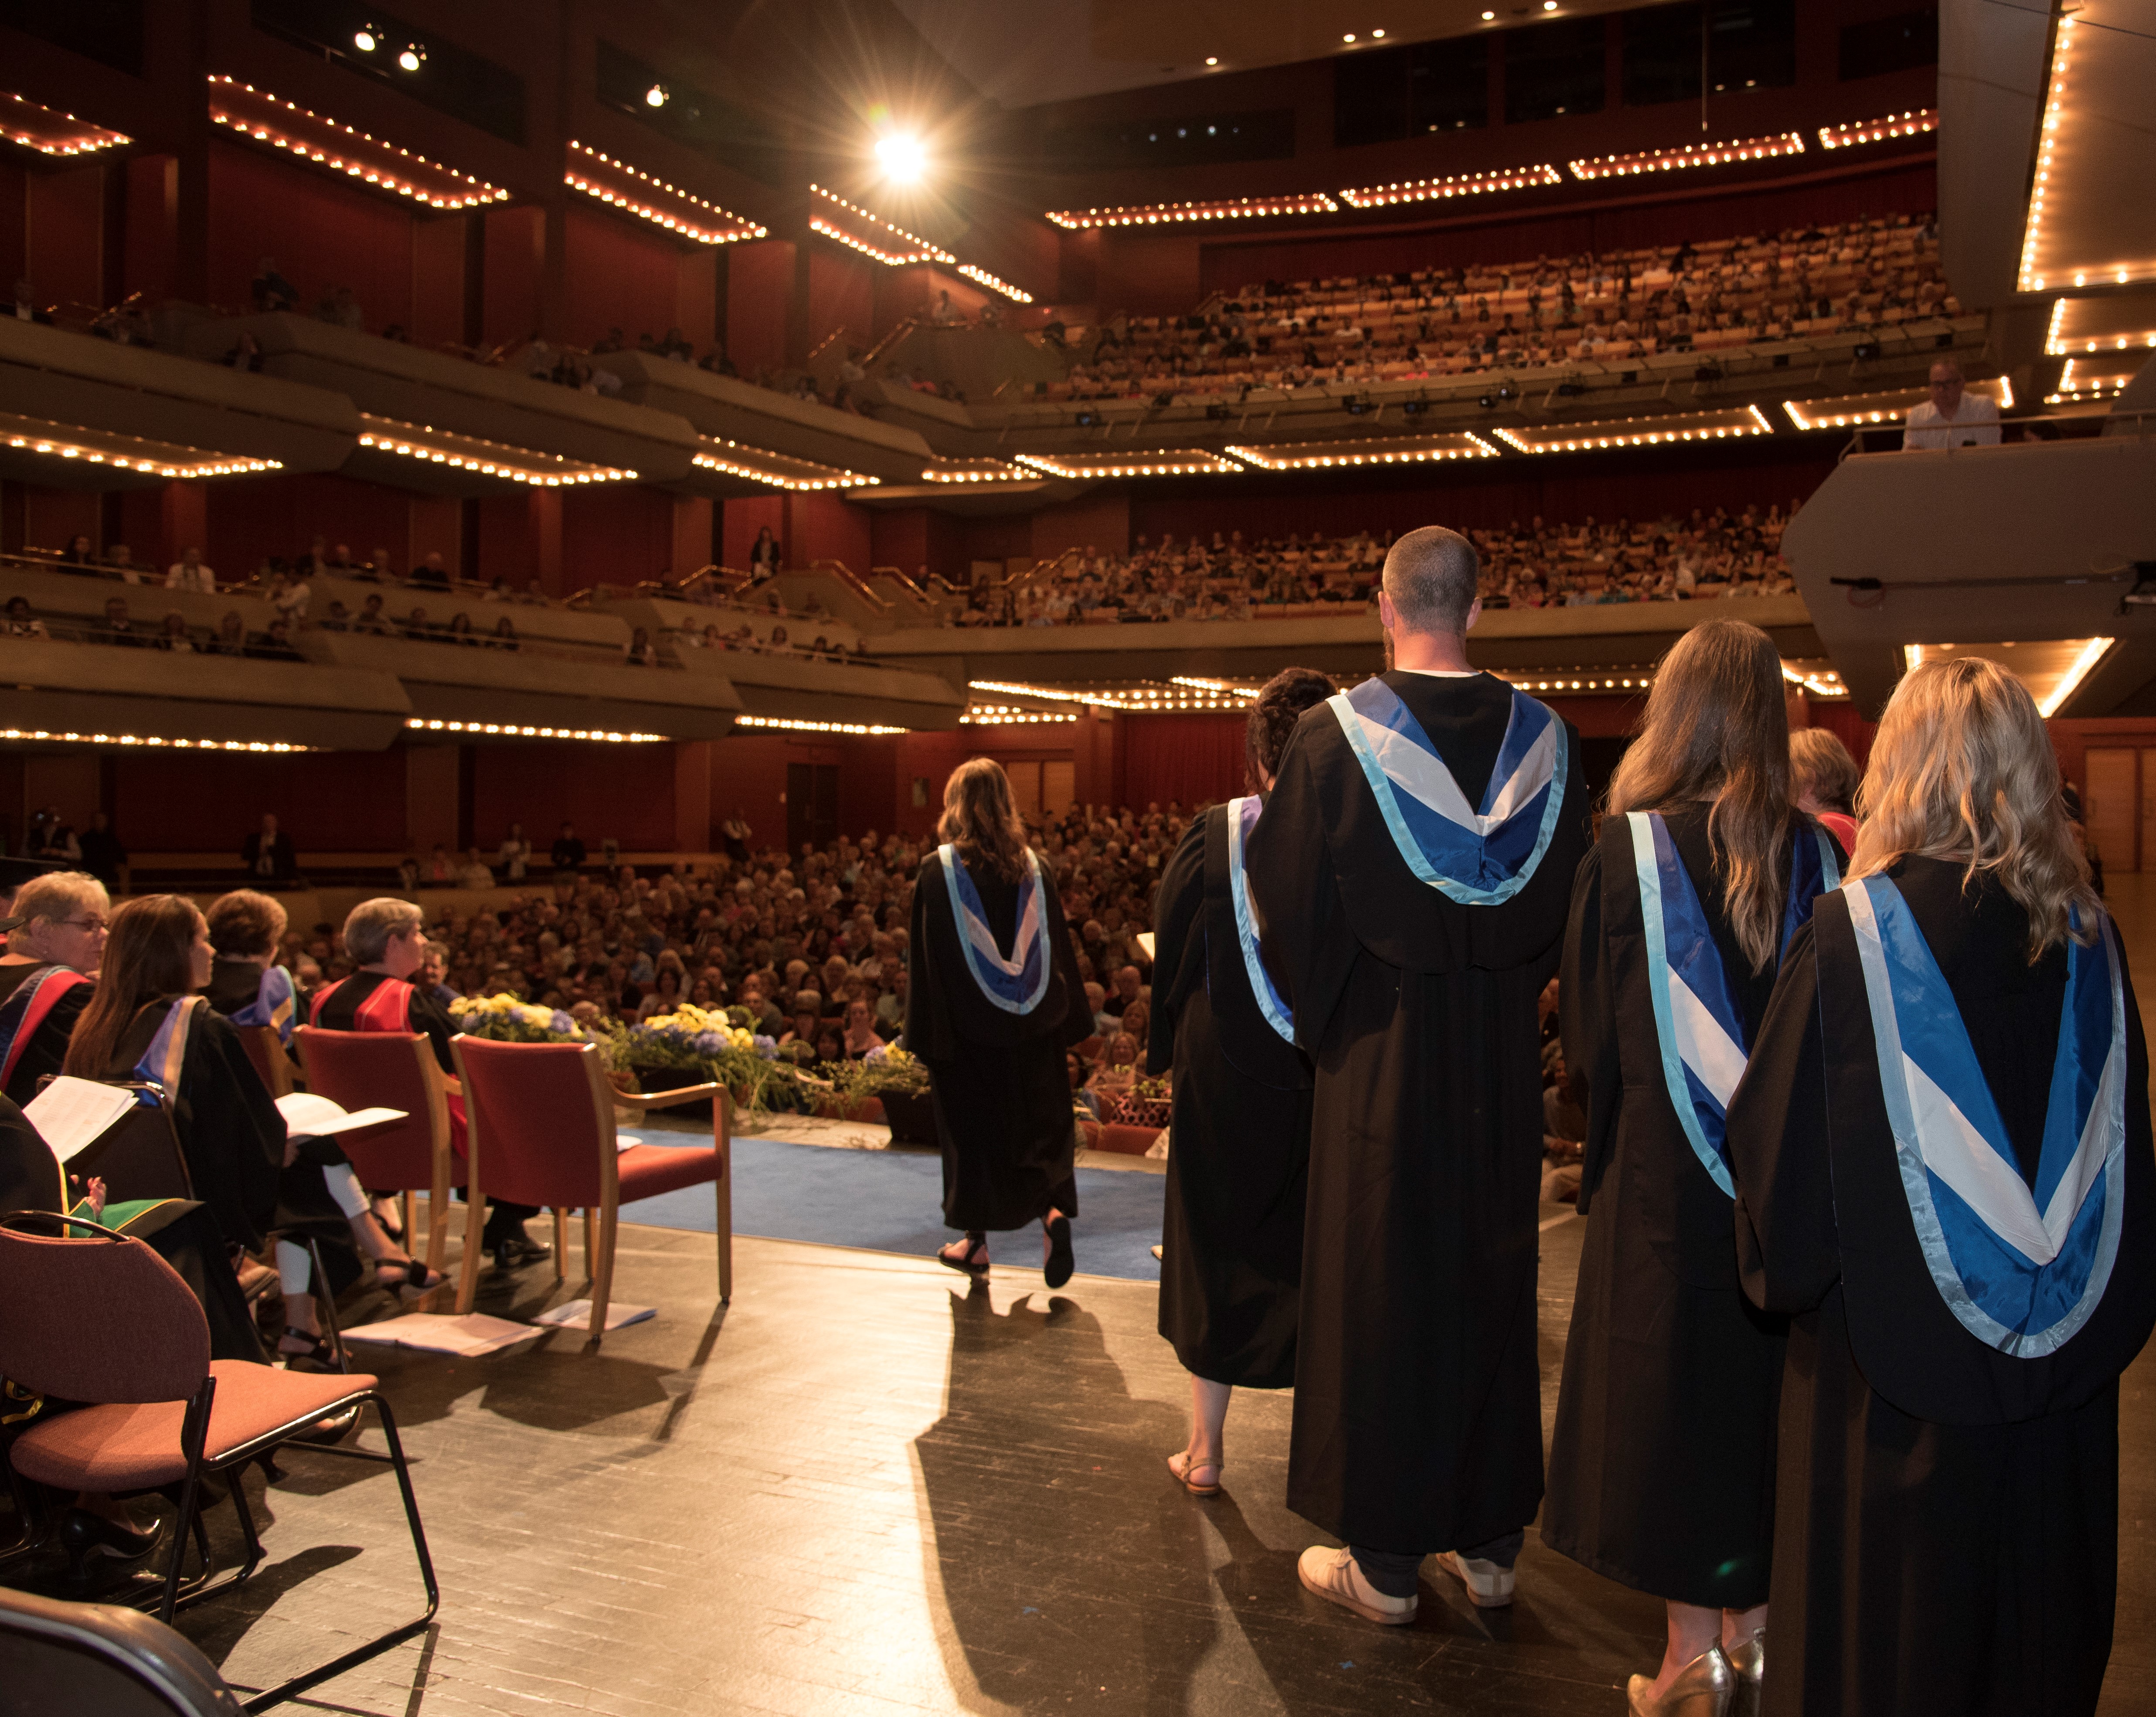 Back view of graduating students walking across stage at convocation ceremony.